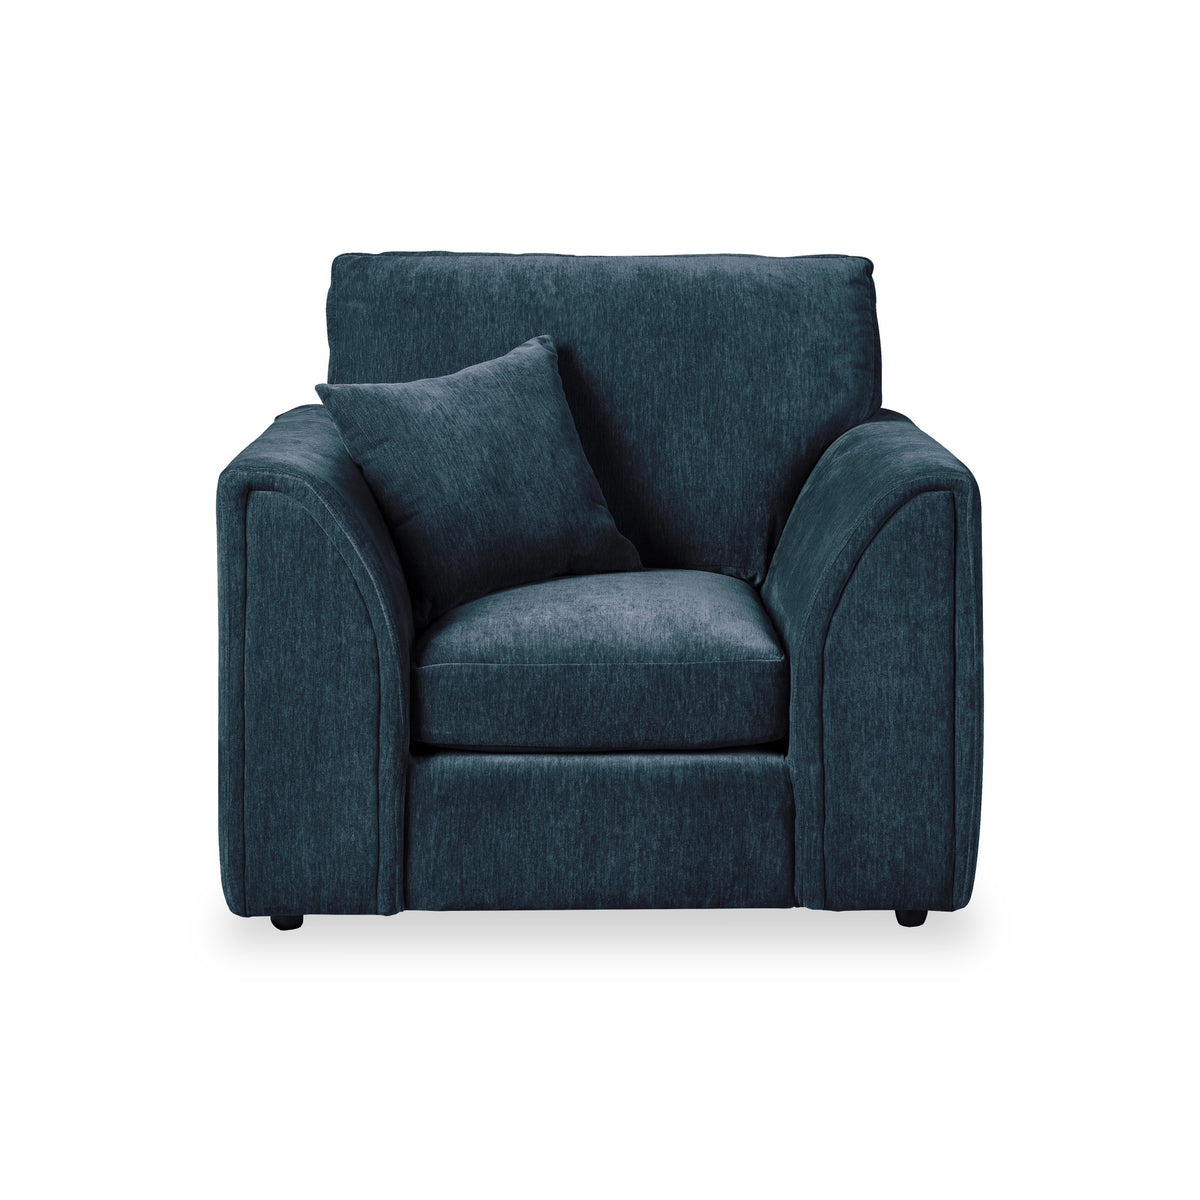 Dunford Navy Blue Armchair from Roseland Furniture